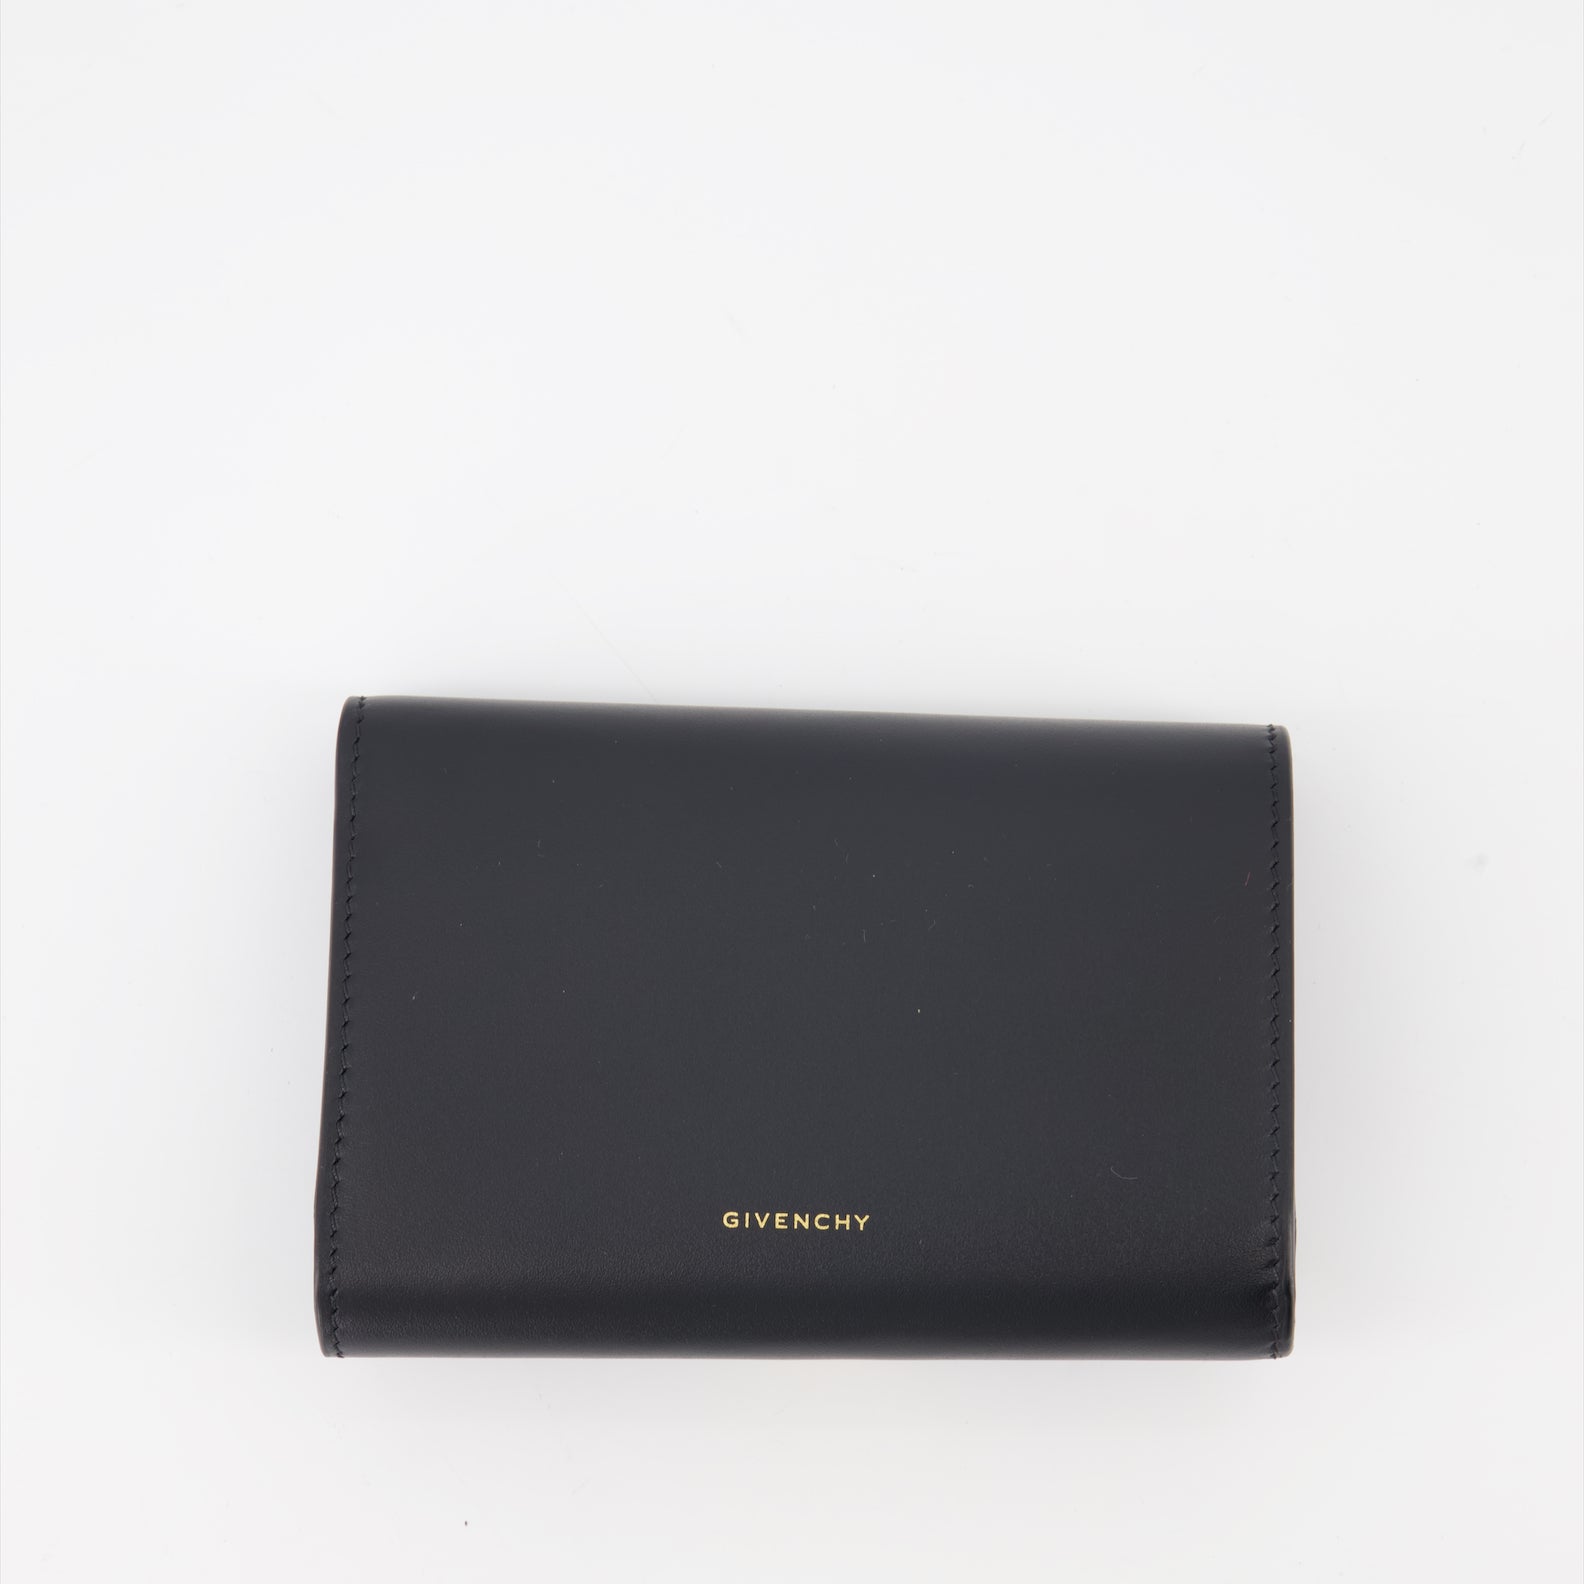 GIVENCHY - Leather Wallet